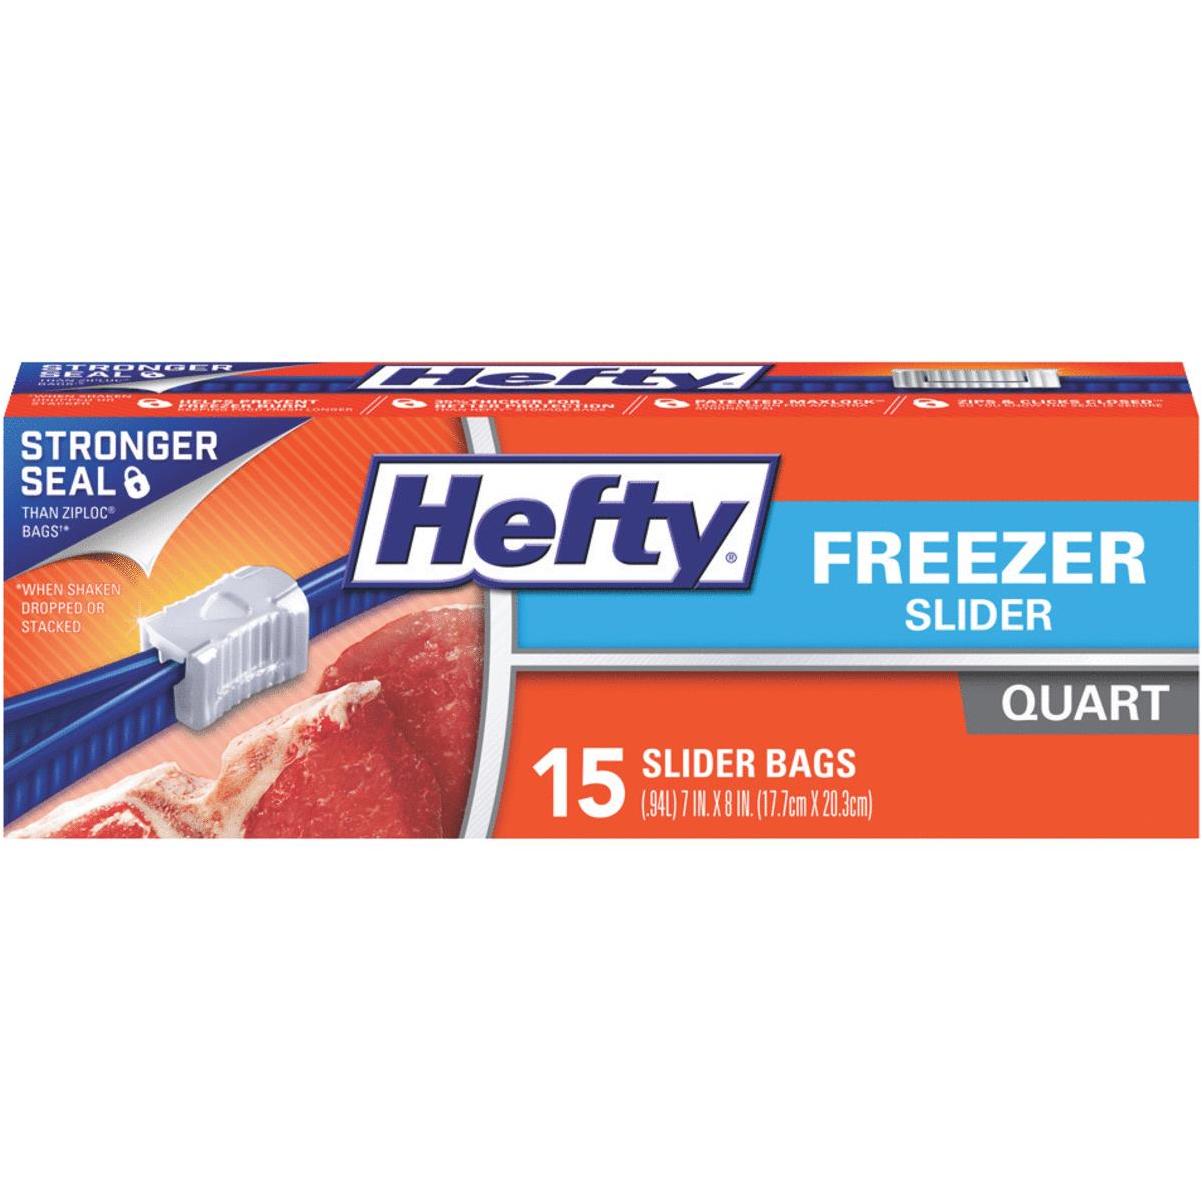 Hefty 1 Qt. Slider Freezer Bag Stand and Fill Expandable Bottom (15-Count)